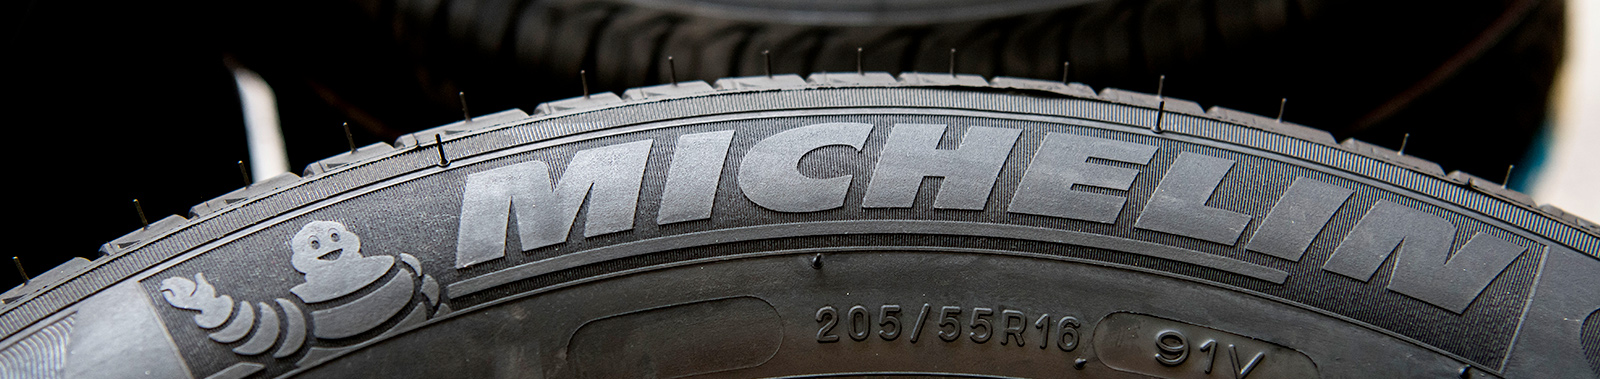 Michelin-tyres